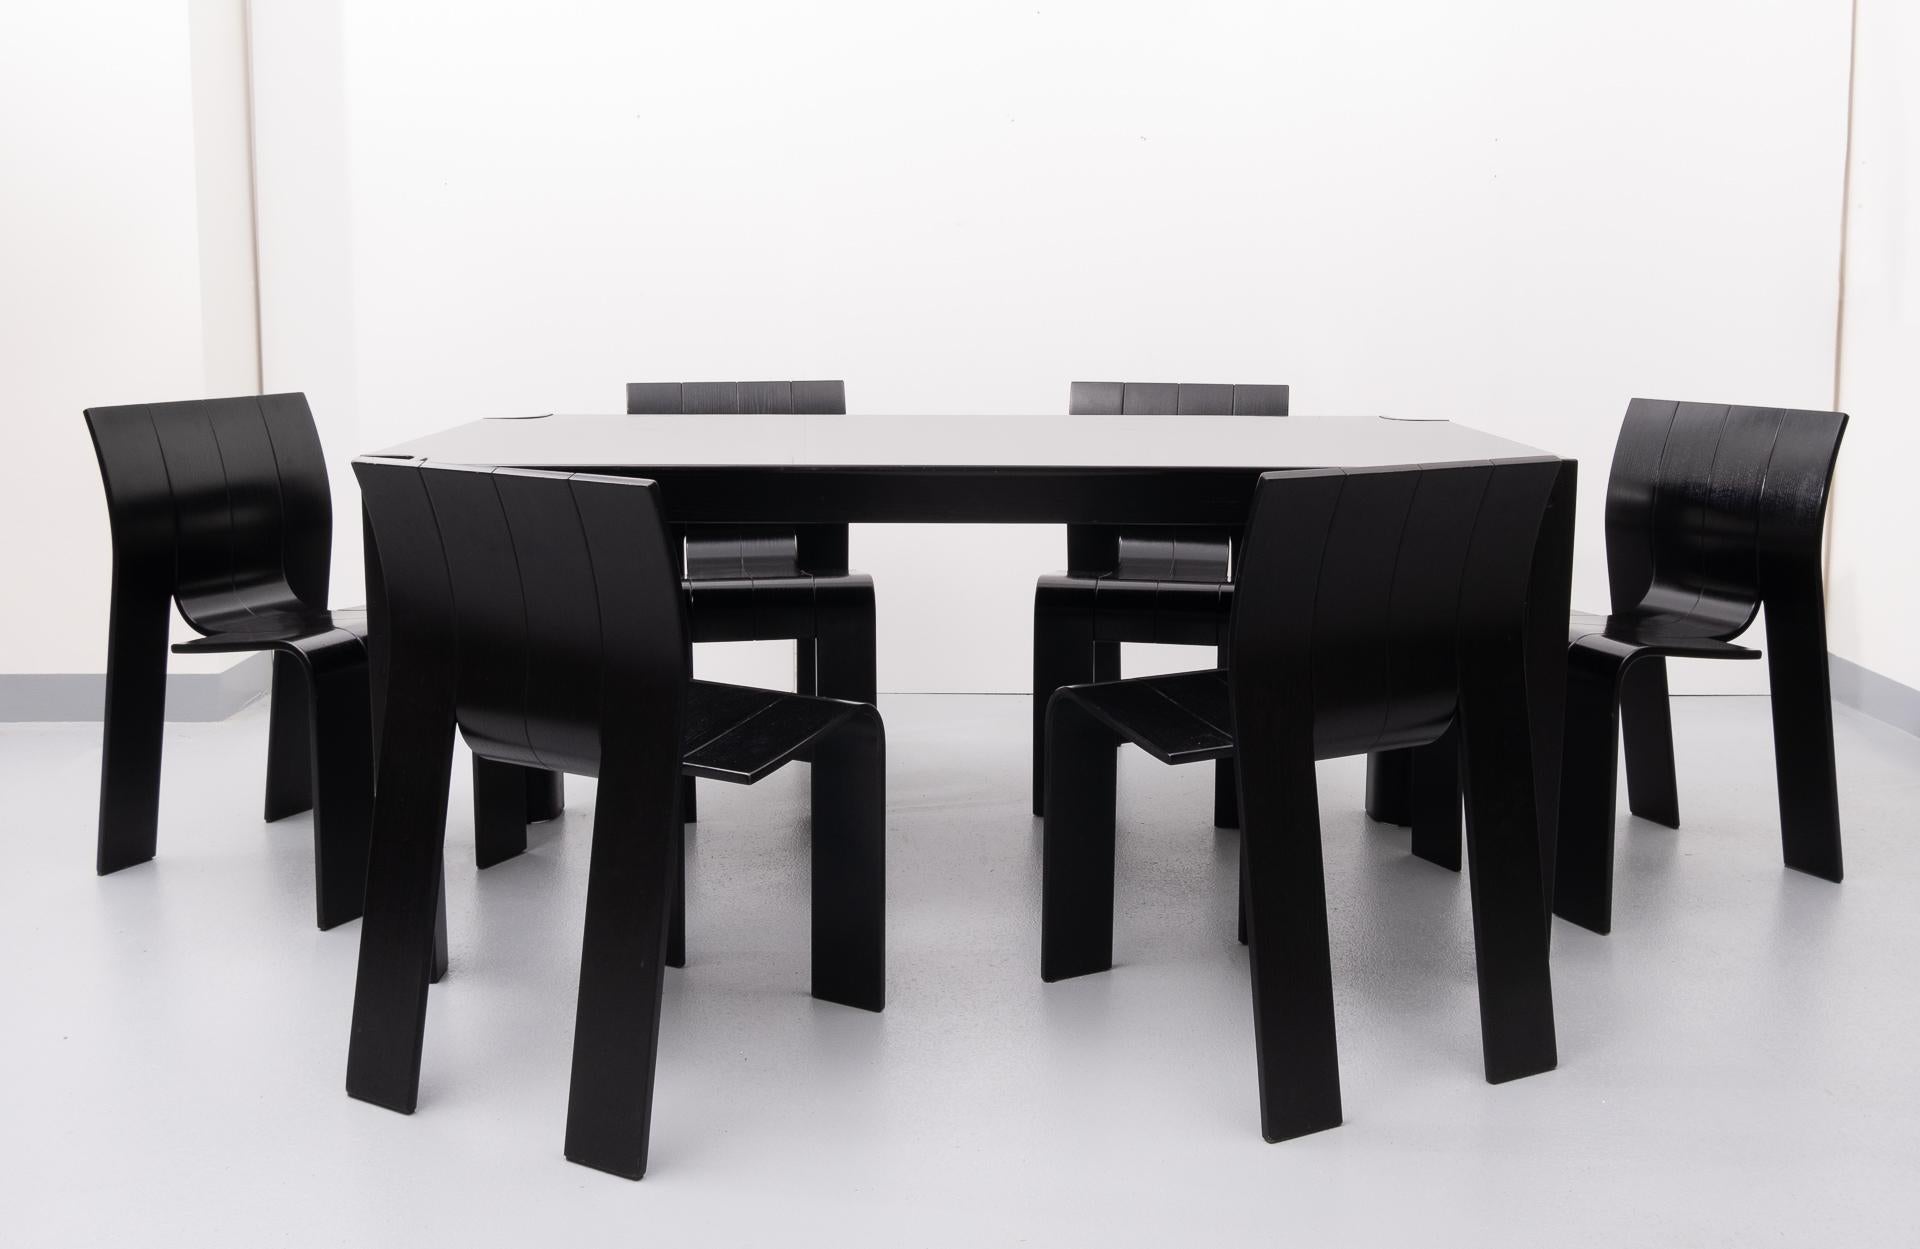 Dutch classic designed dining room set. 6 strip chairs comes with the matching table.
All black color, 1970s. Gijs Bakker for Castelijn Laminated beechwood.

Measures: Table height 74 cm width 170 cm depth 85 cm.